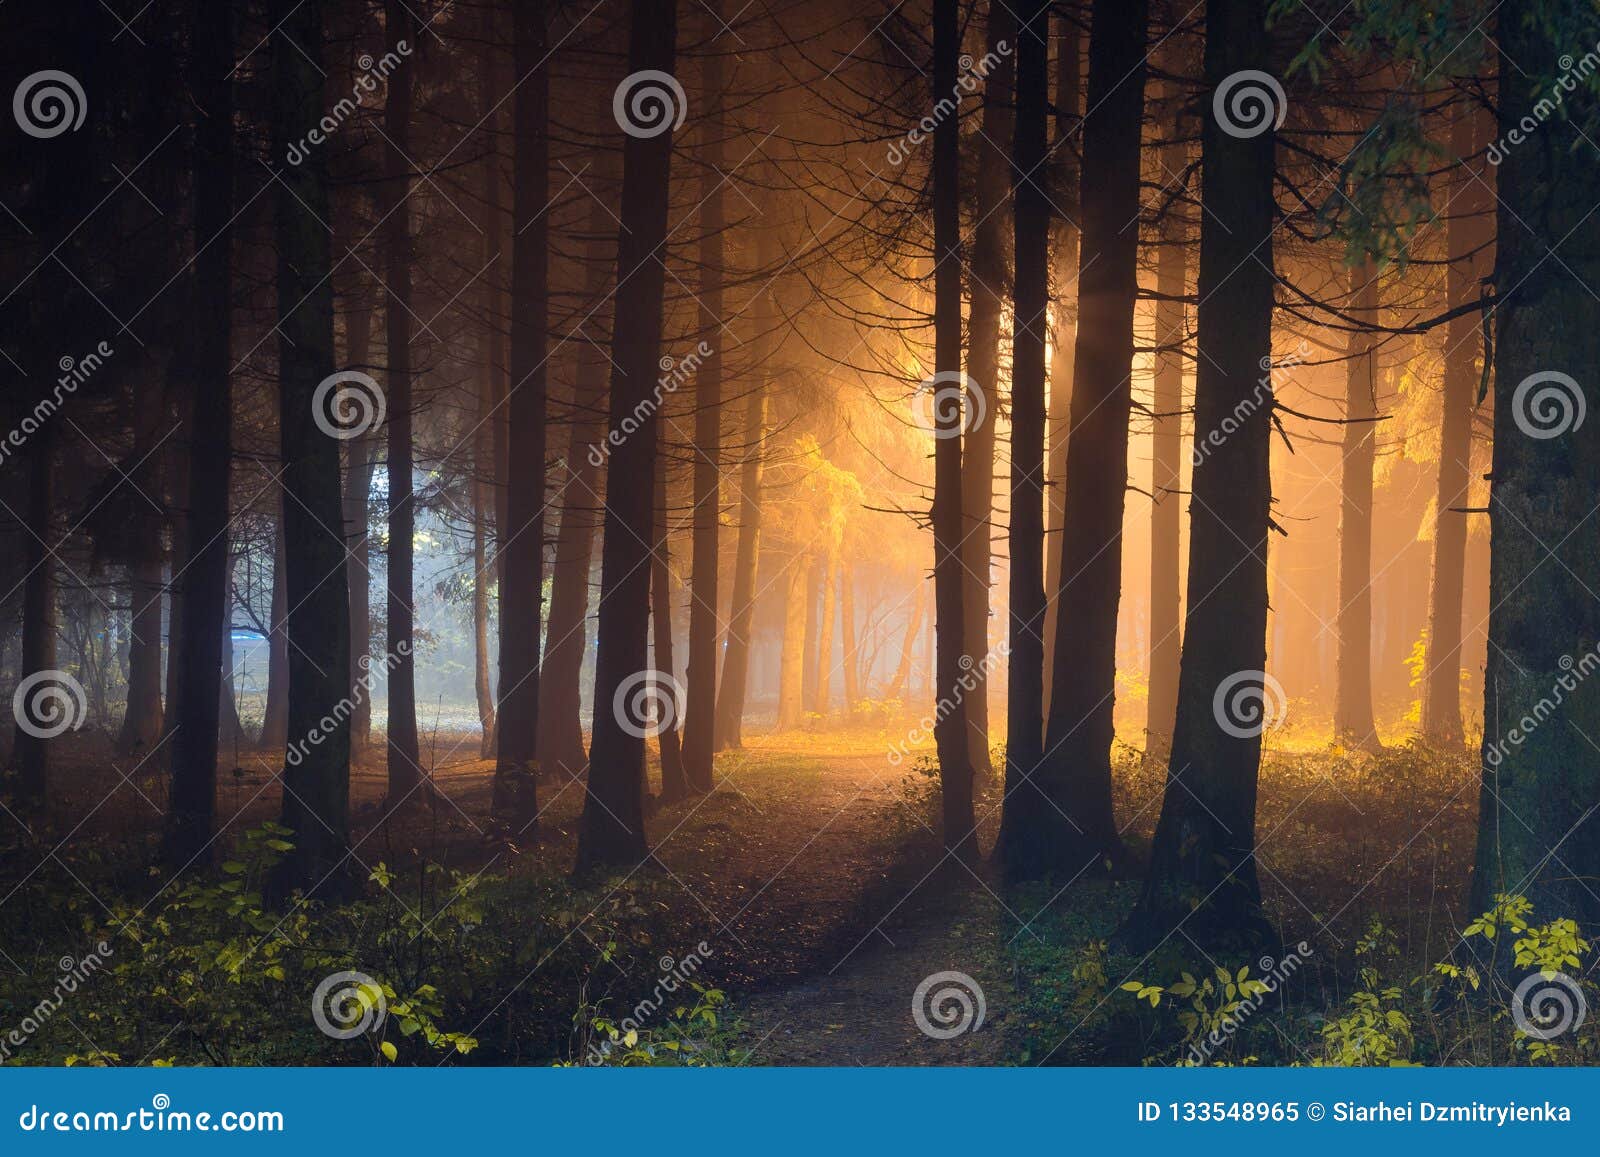 mystic night forest with shining light